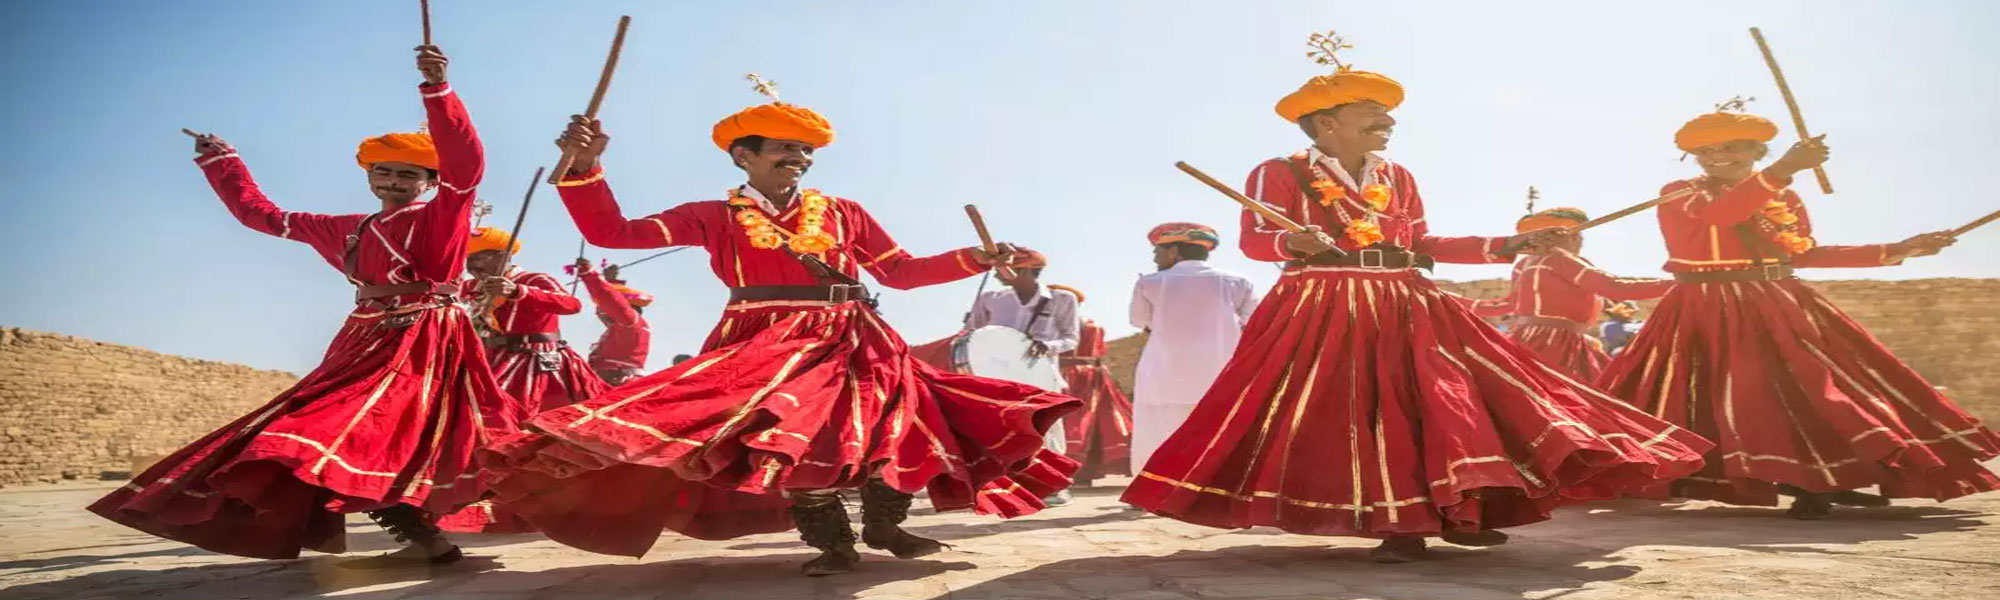 Himpushp Tours in India with Desert Festival Tours in India  